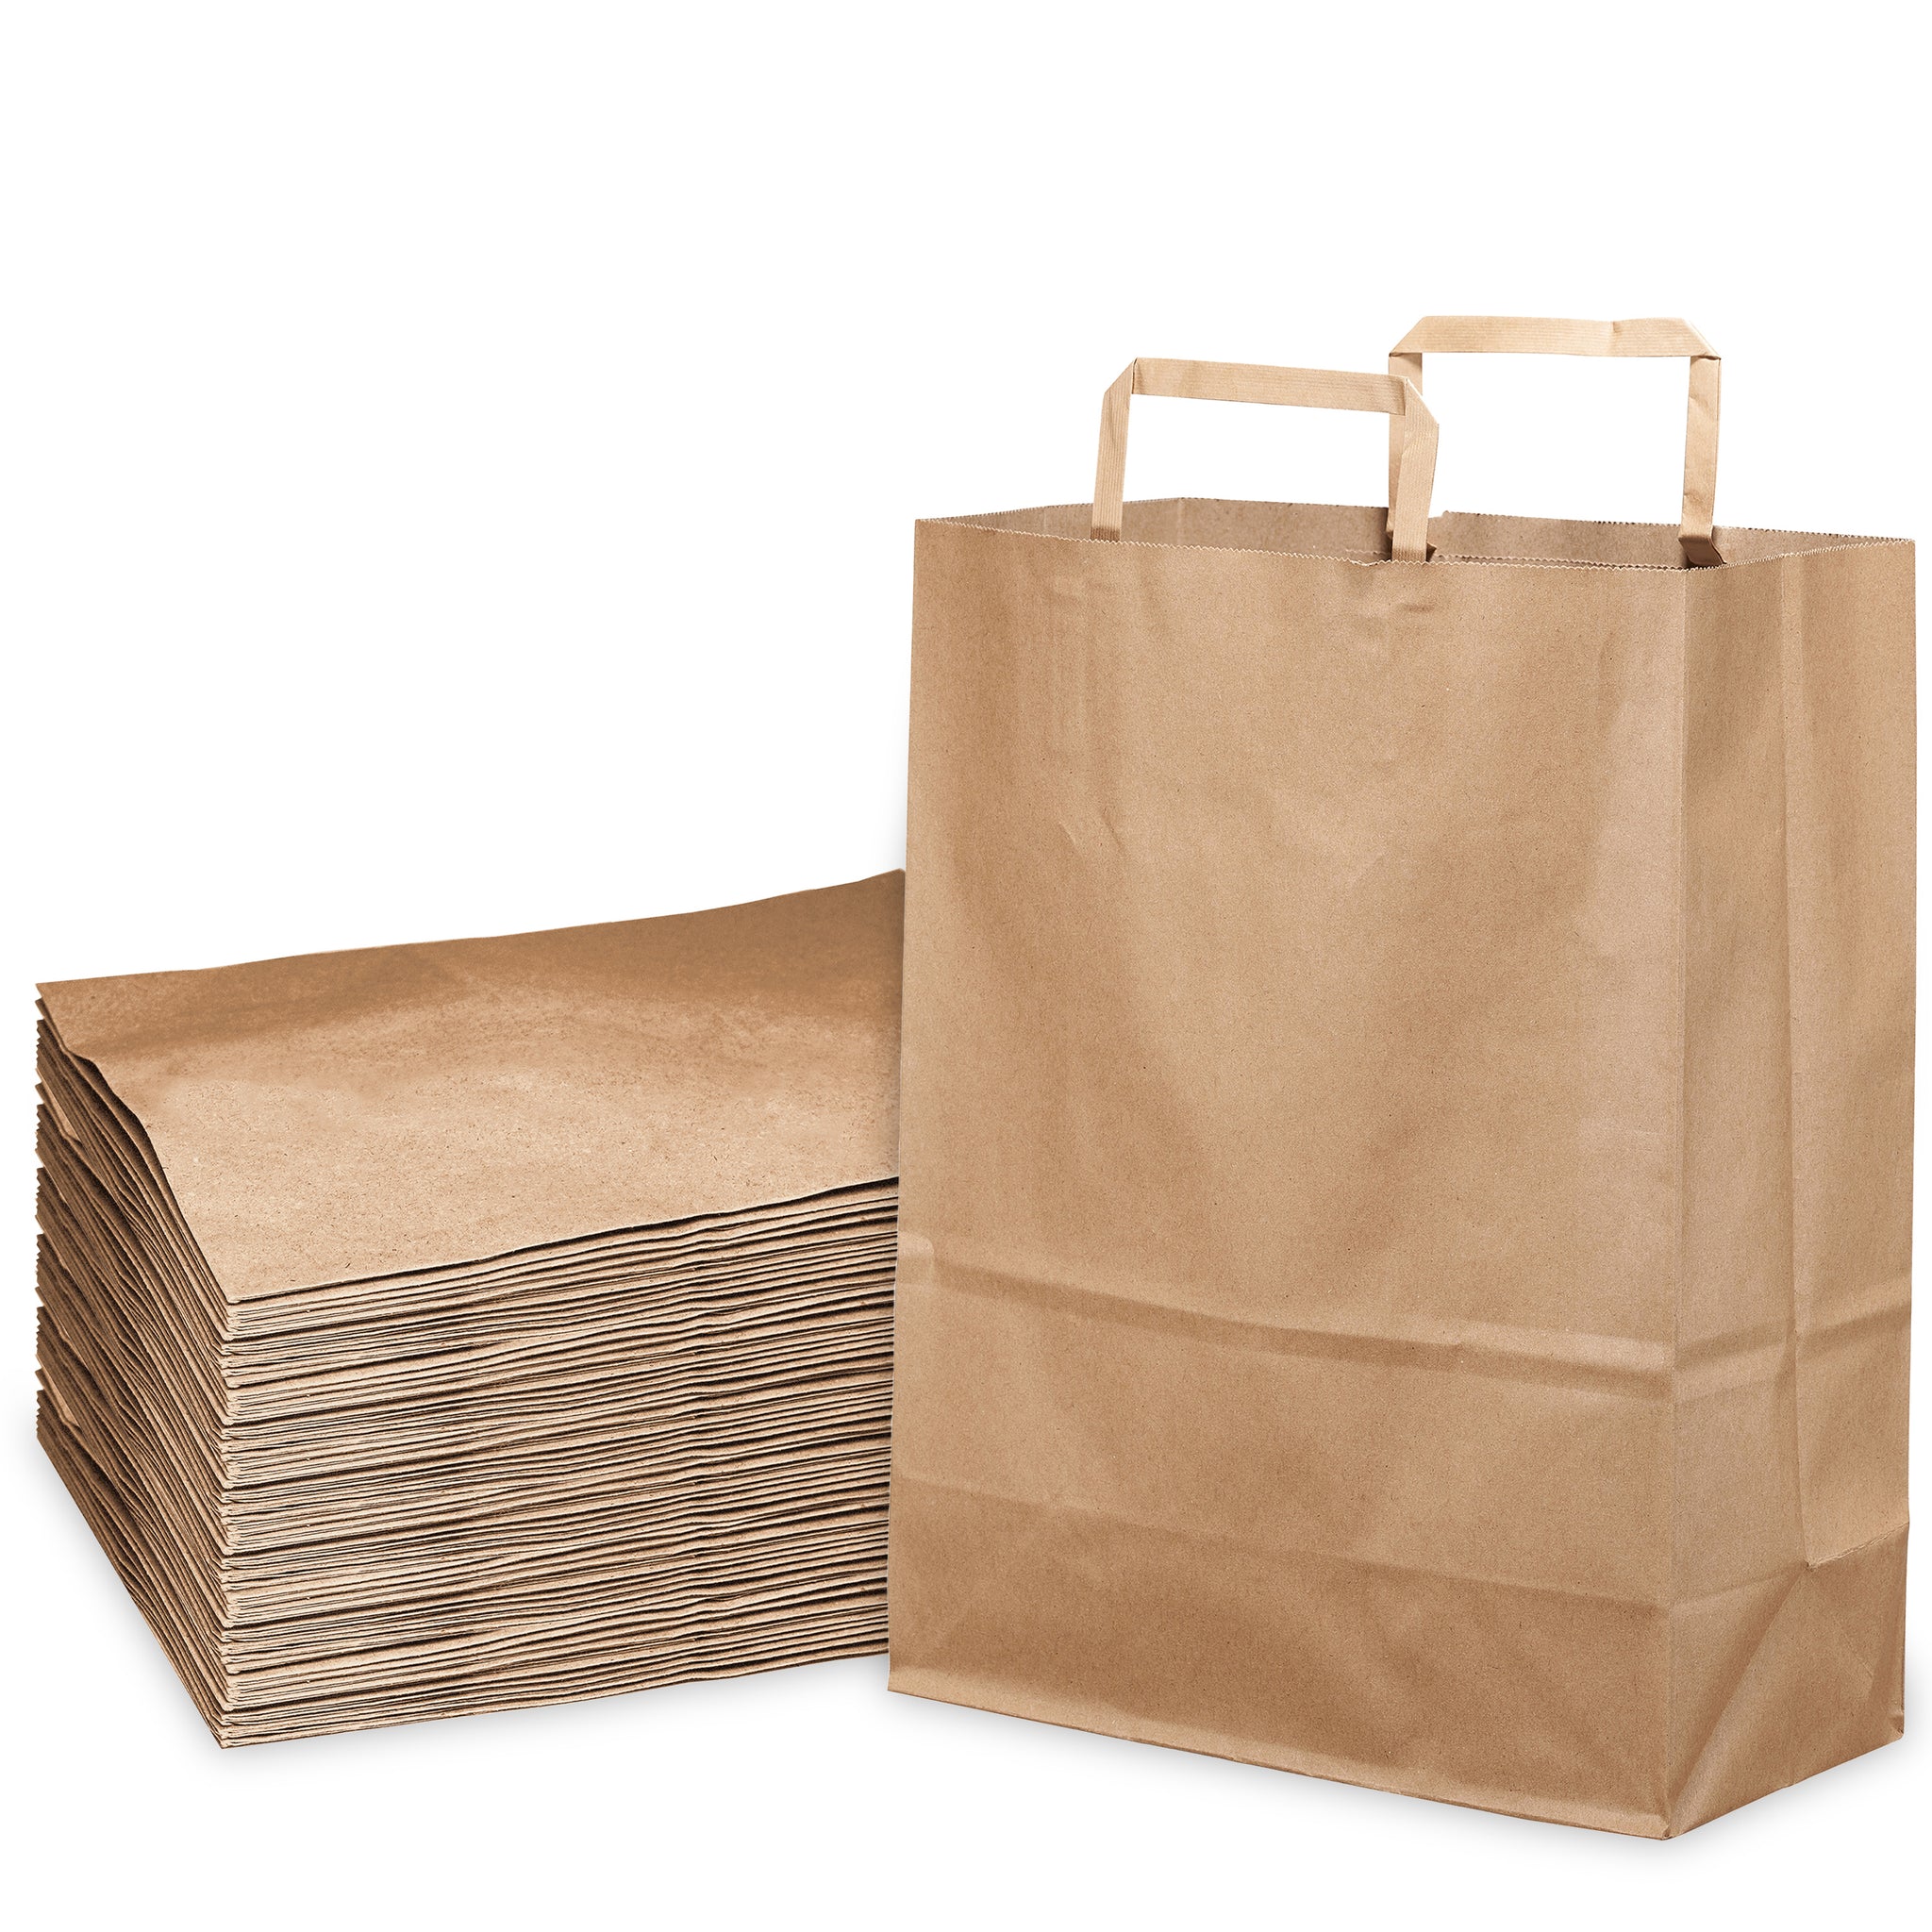 Kraft Paper Gift Bags with Paper Handles Brown Shopping Bags, Retail, Reusable, Party, Grocery Bags, Eco Friendly, Recyclable